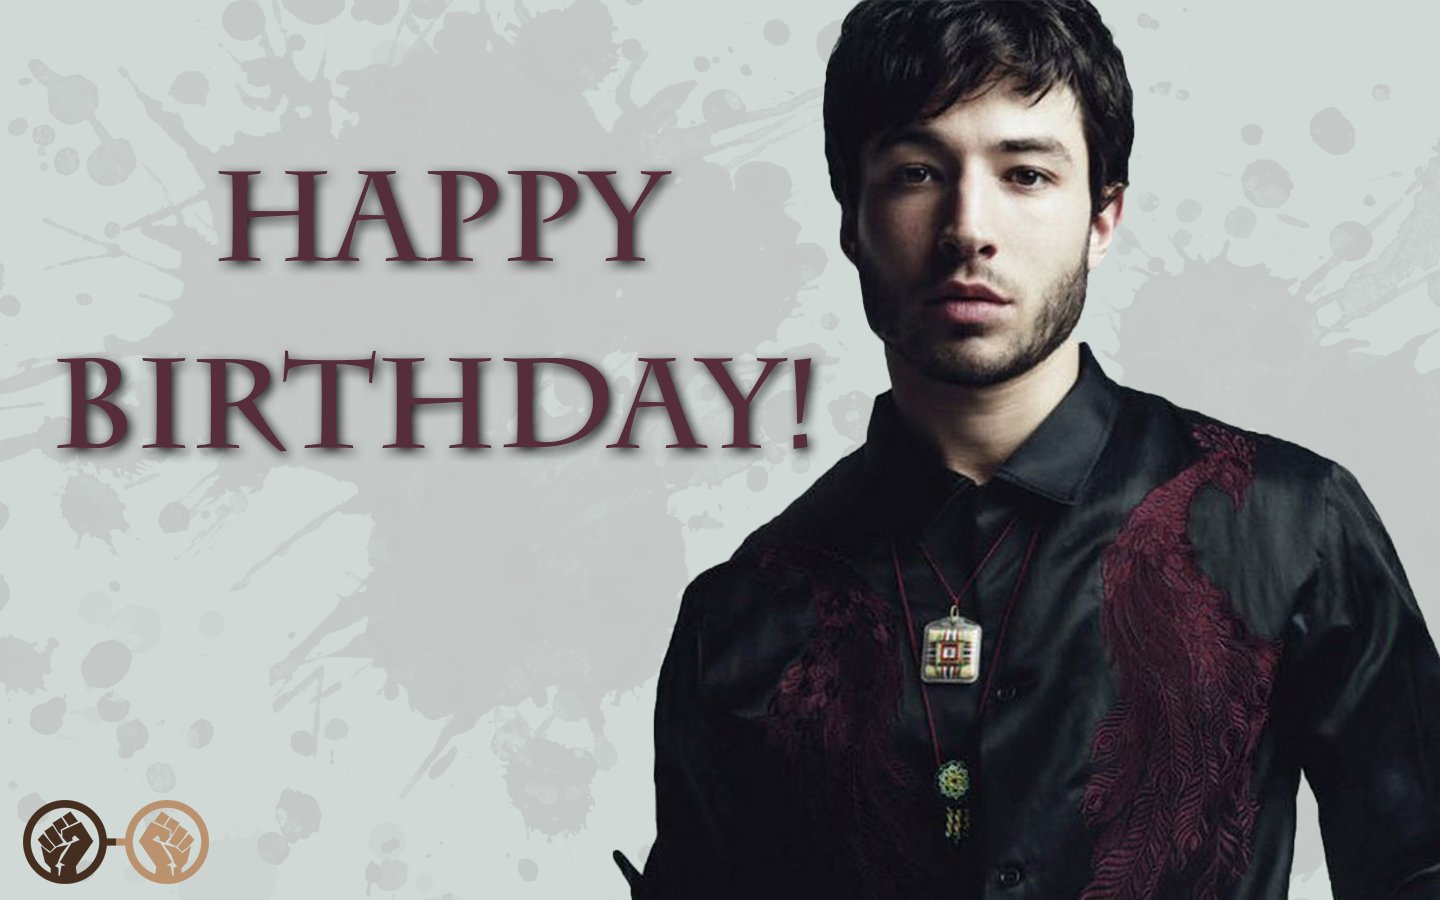 Happy birthday, Ezra Miller! Our favourite speedster turns 26 today. We hope he\s having an amazing day! 